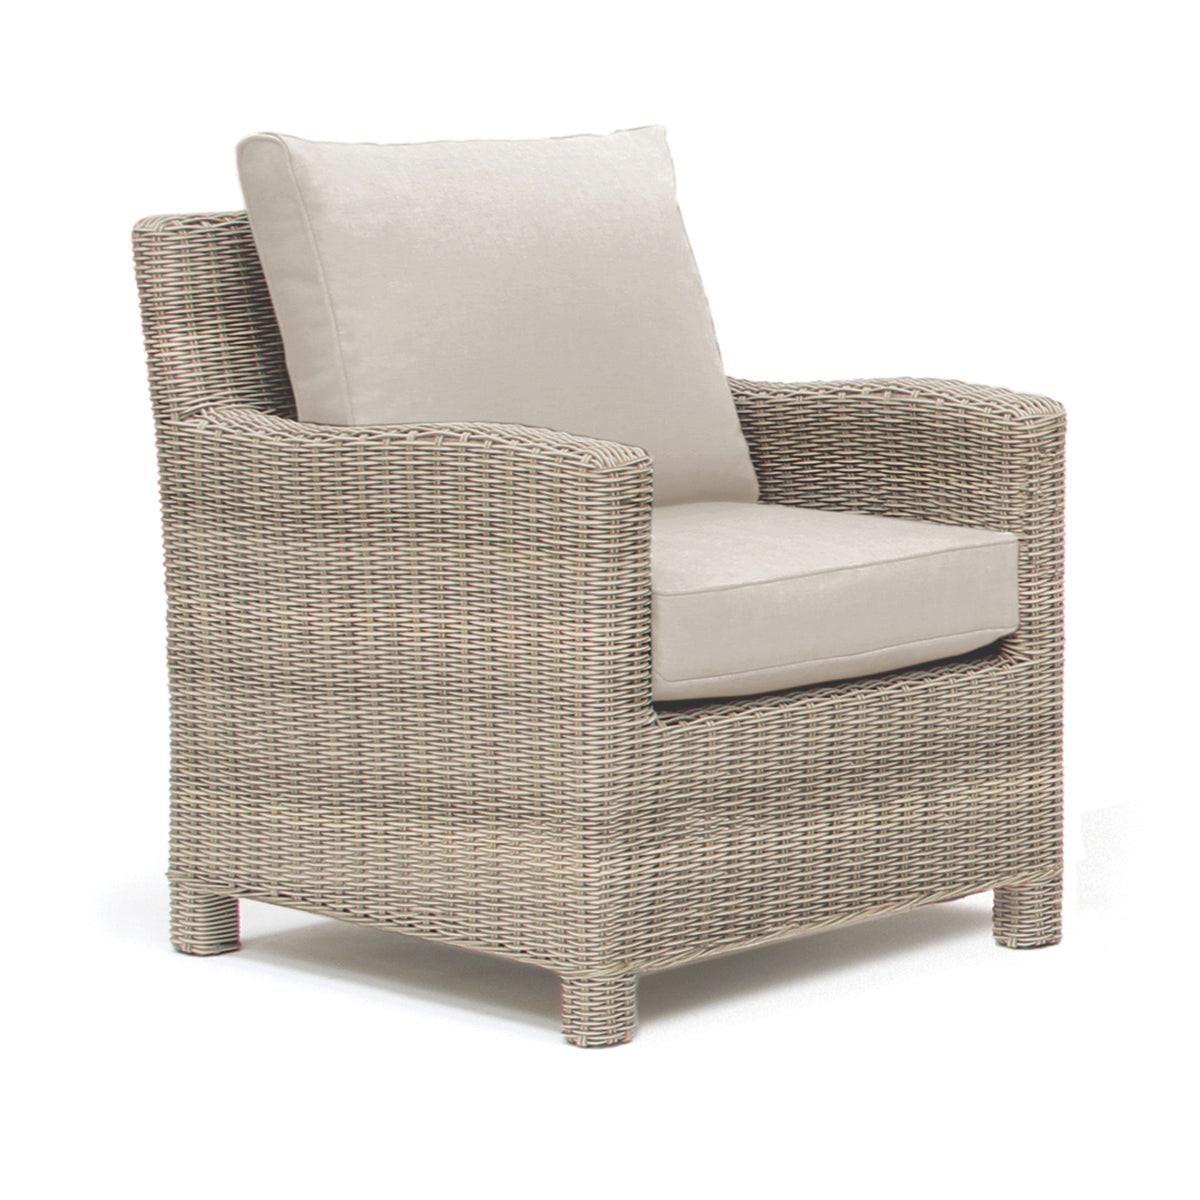 Kettler Palma Signature Casual Dining Armchair with Weather Proof Cushion - Oyster Wicker